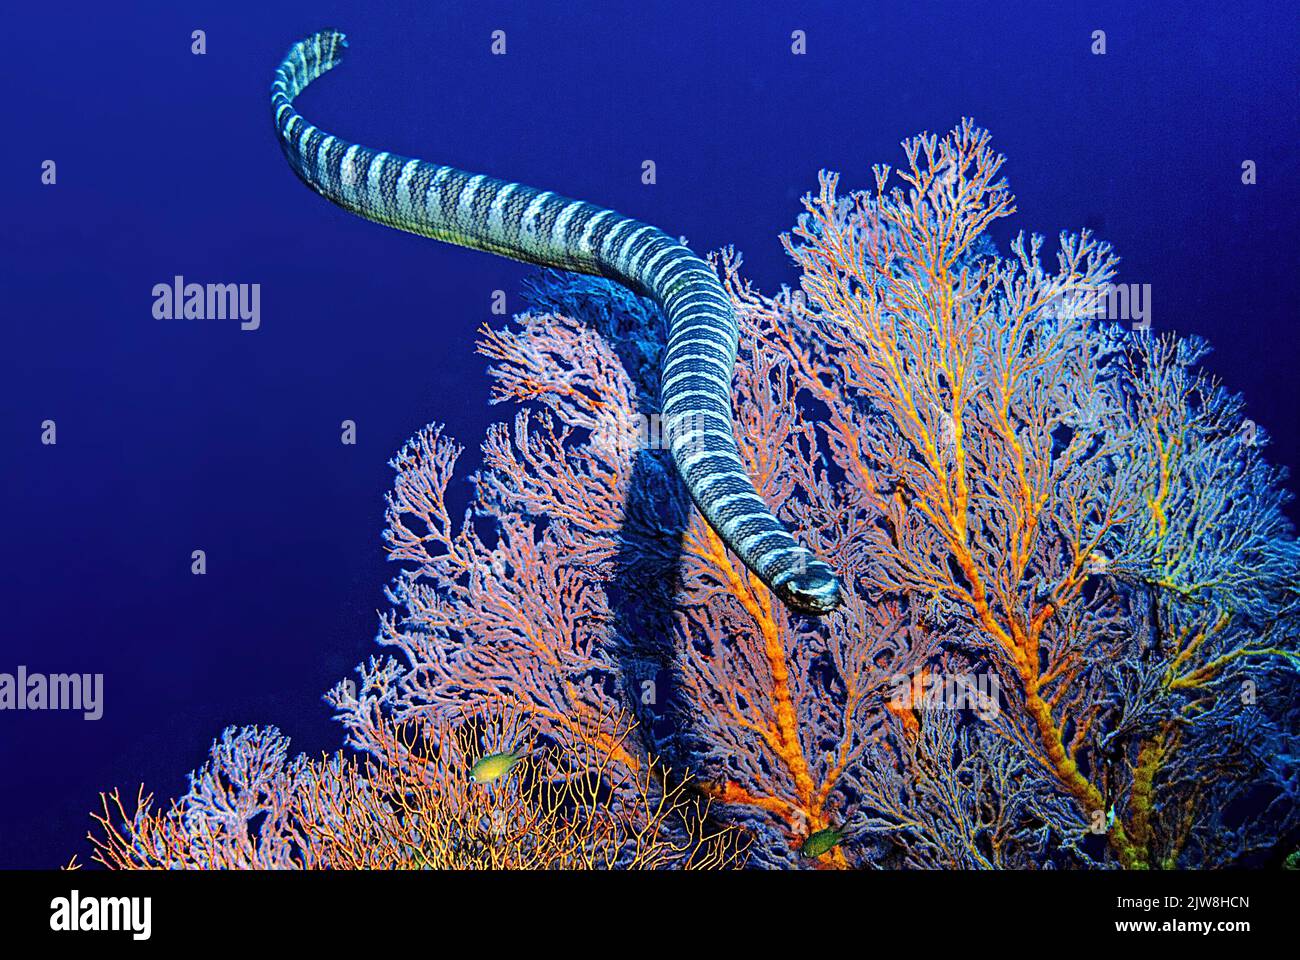 Annulated sea snake (Hydrophis cyanocinctus) also known as blue-banded sea snake, a type of venomous sea snake, Raja Ampat, Indonesia, Pacific Ocean Stock Photo